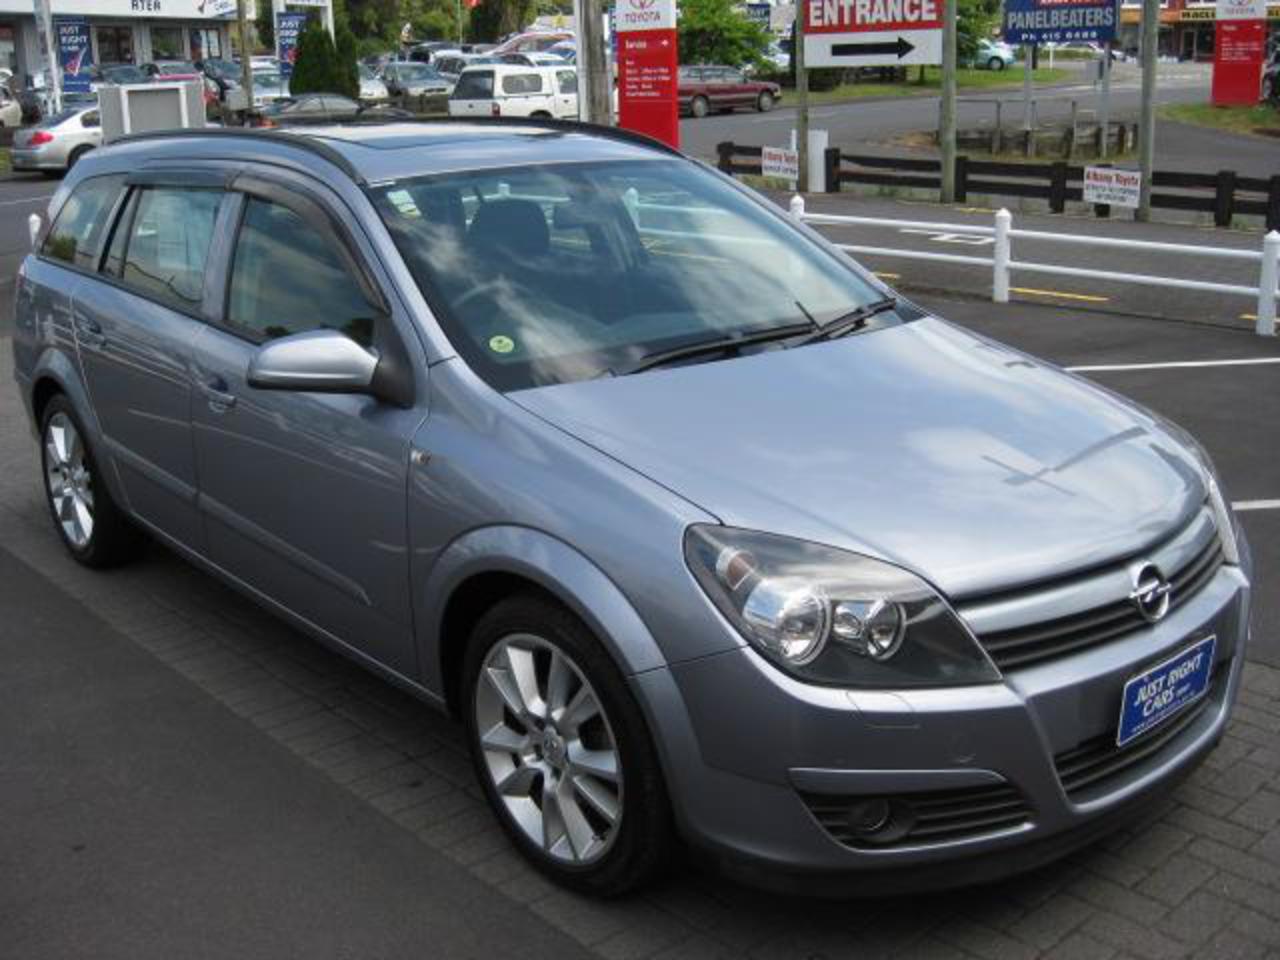 Opel Astra 20 CD wagon. View Download Wallpaper. 640x480. Comments